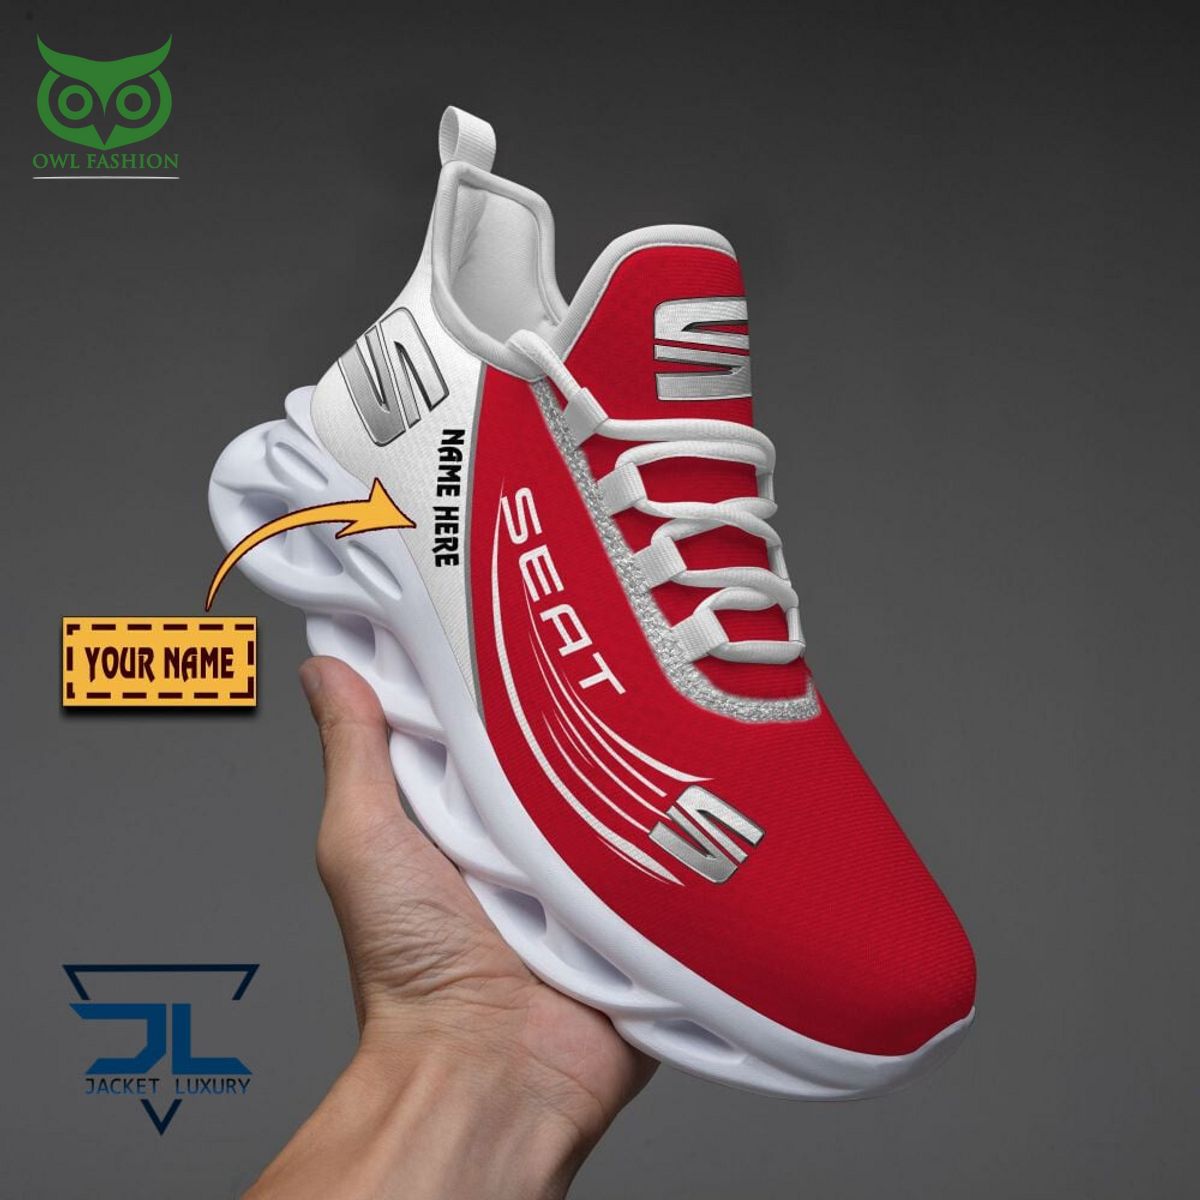 SEAT Car Brand Personalized Max Soul Sneakers